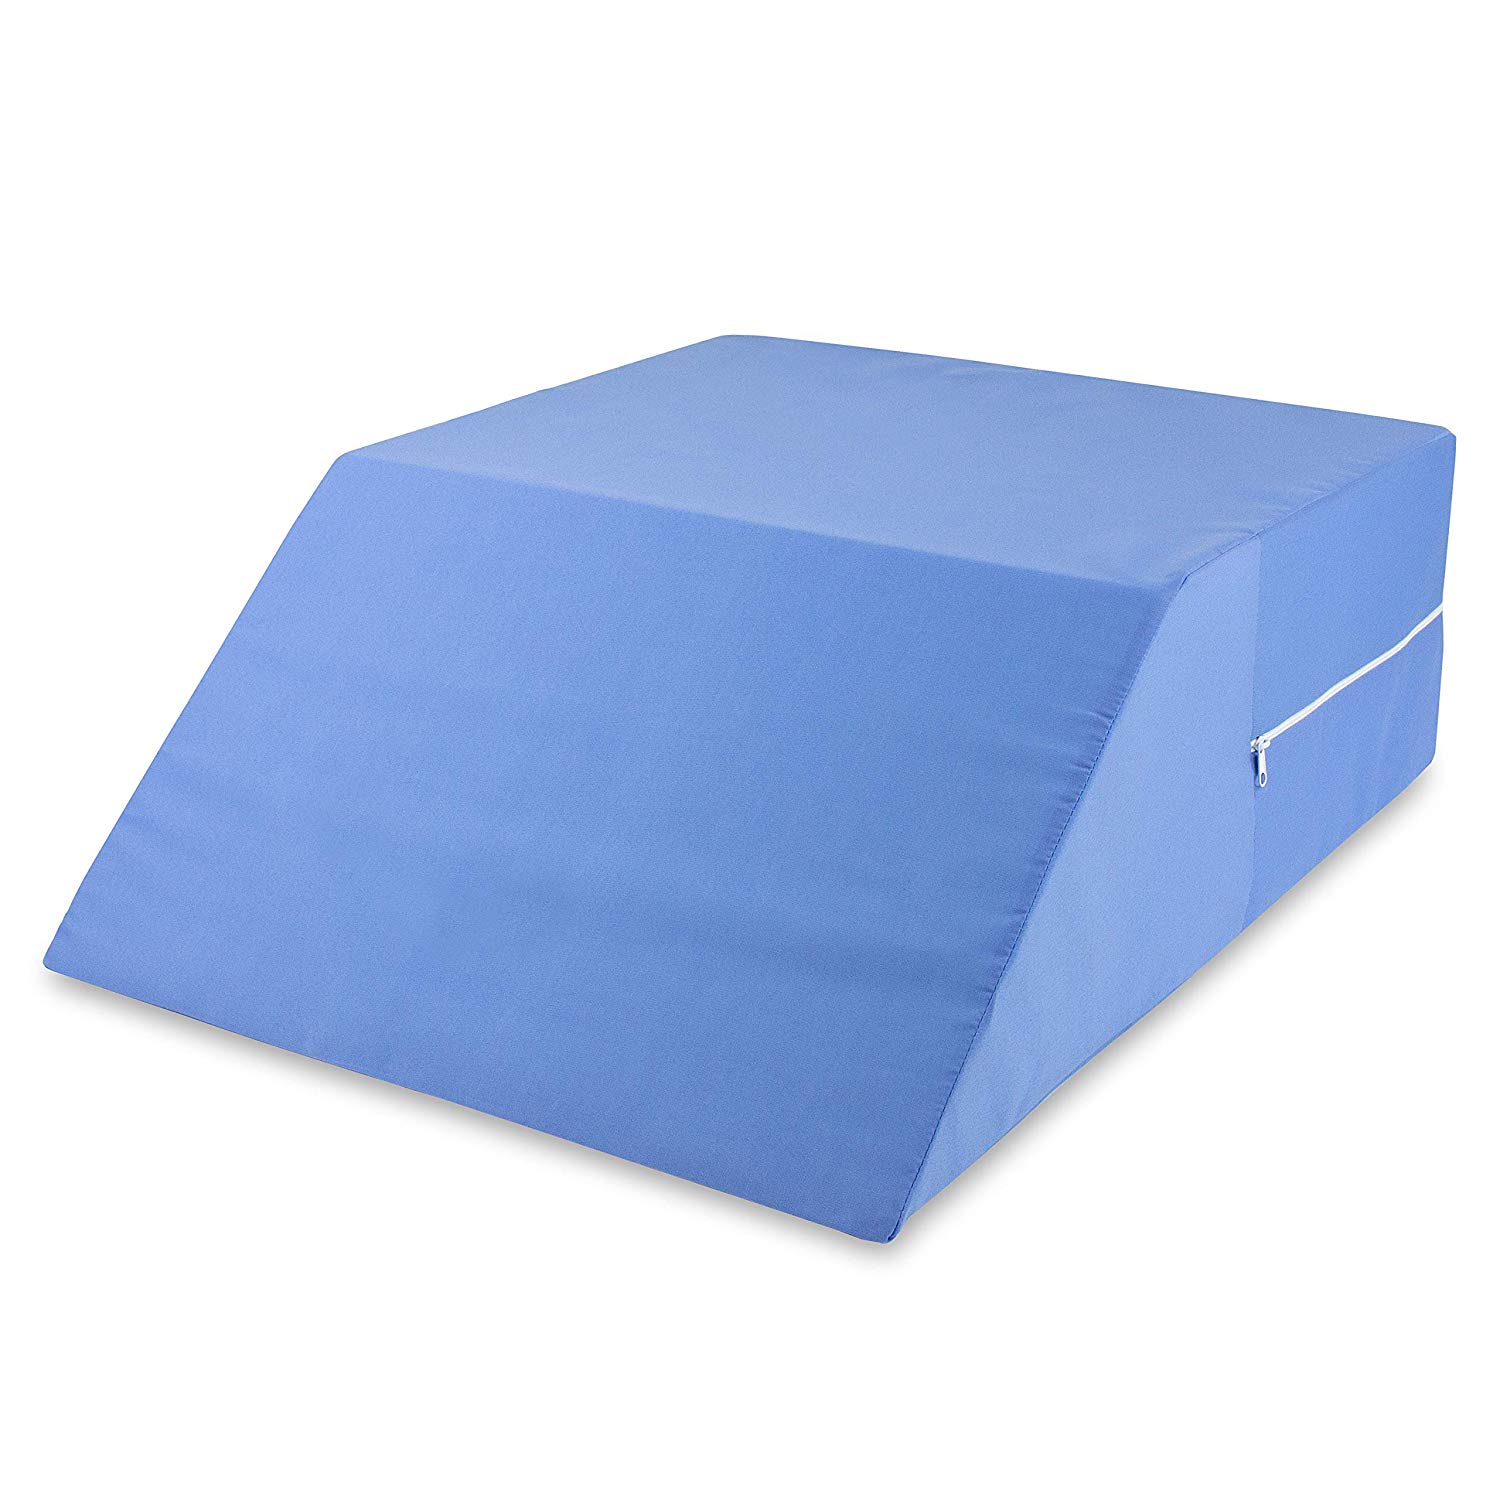 DMI Healthcare Ortho Bed Wedge Pillow